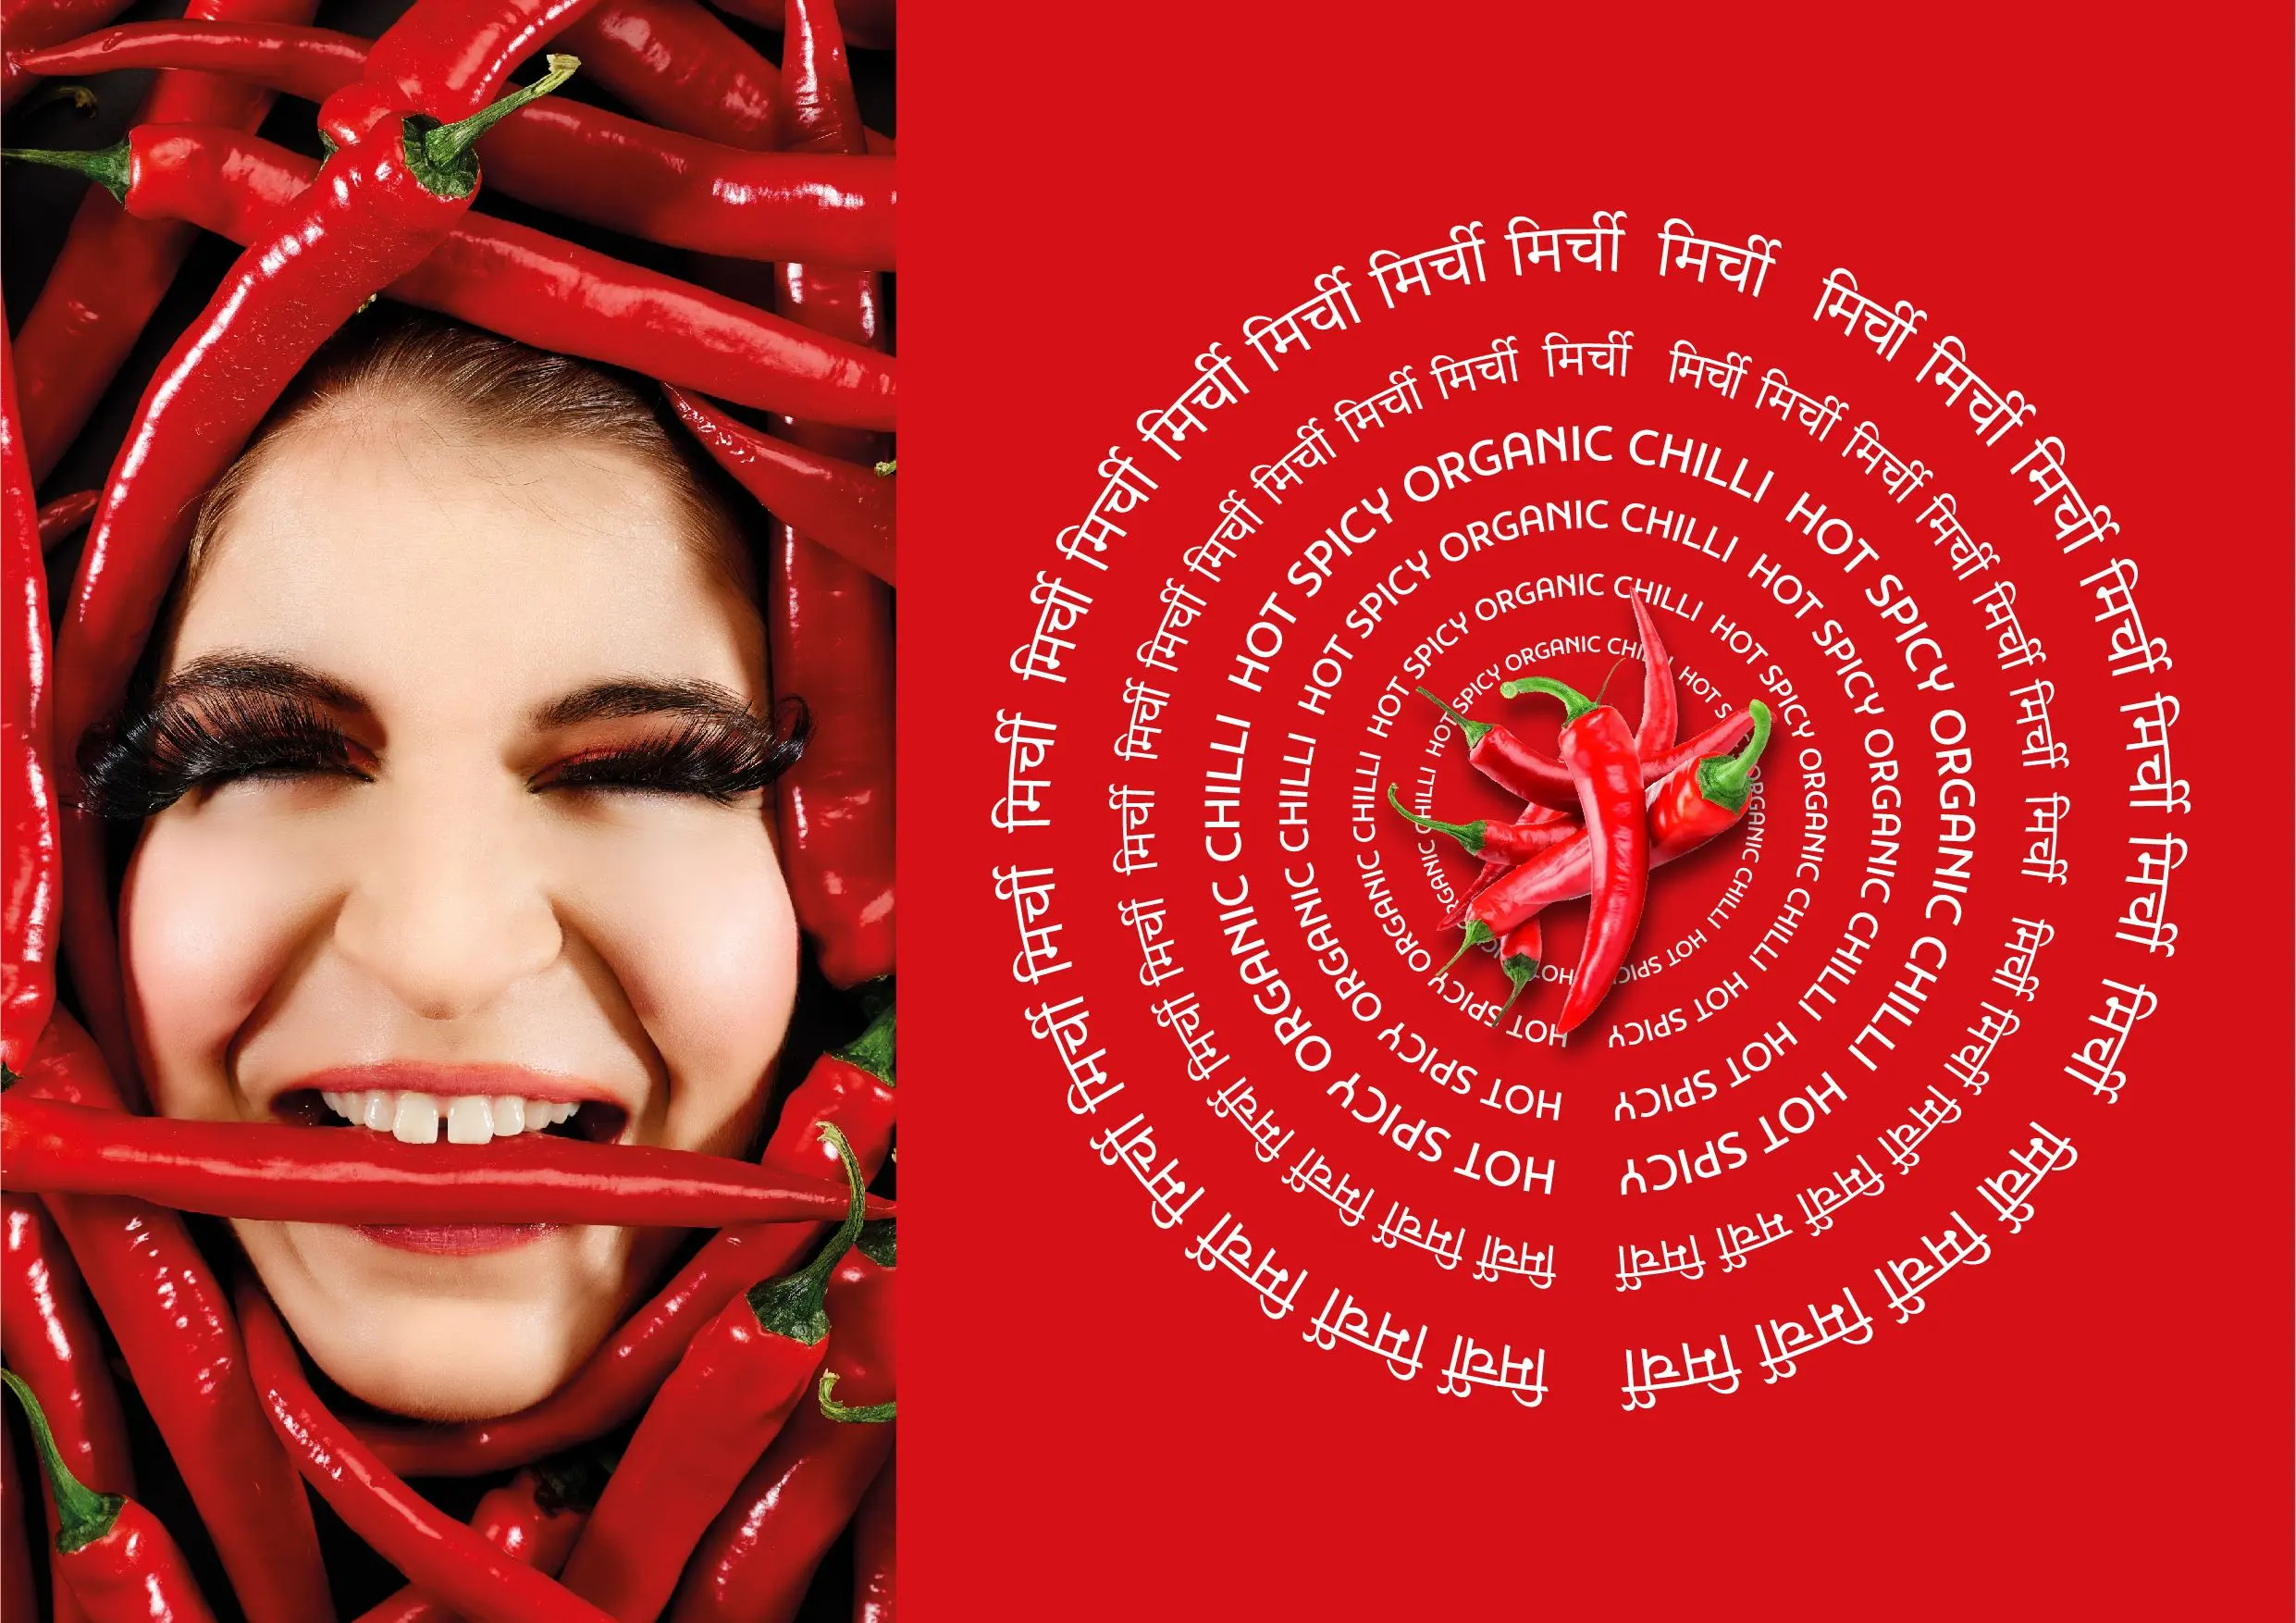 A woman's face is surrounded by chili peppers.